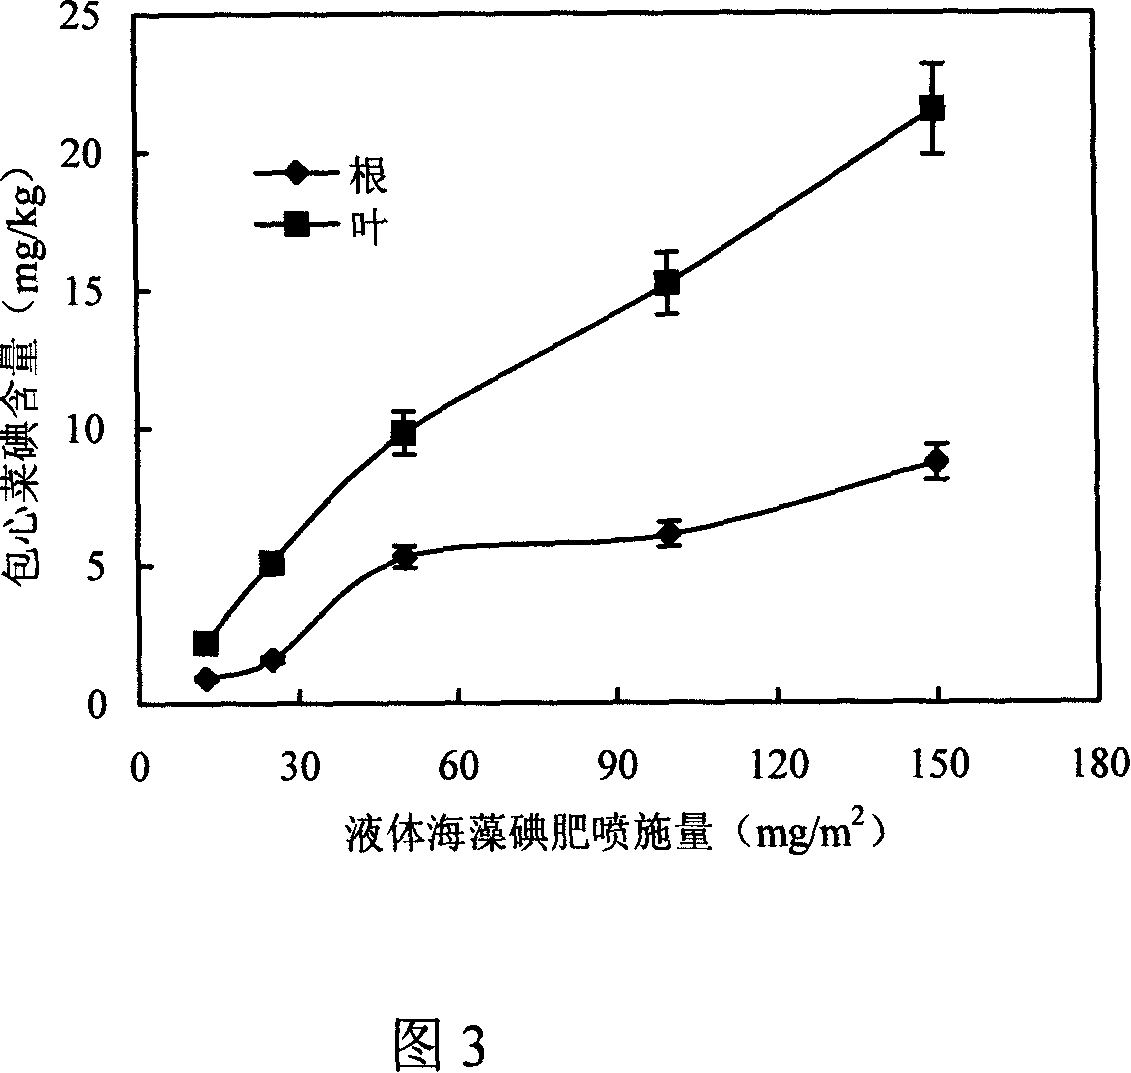 Planting method of iodine-enriched cabbage